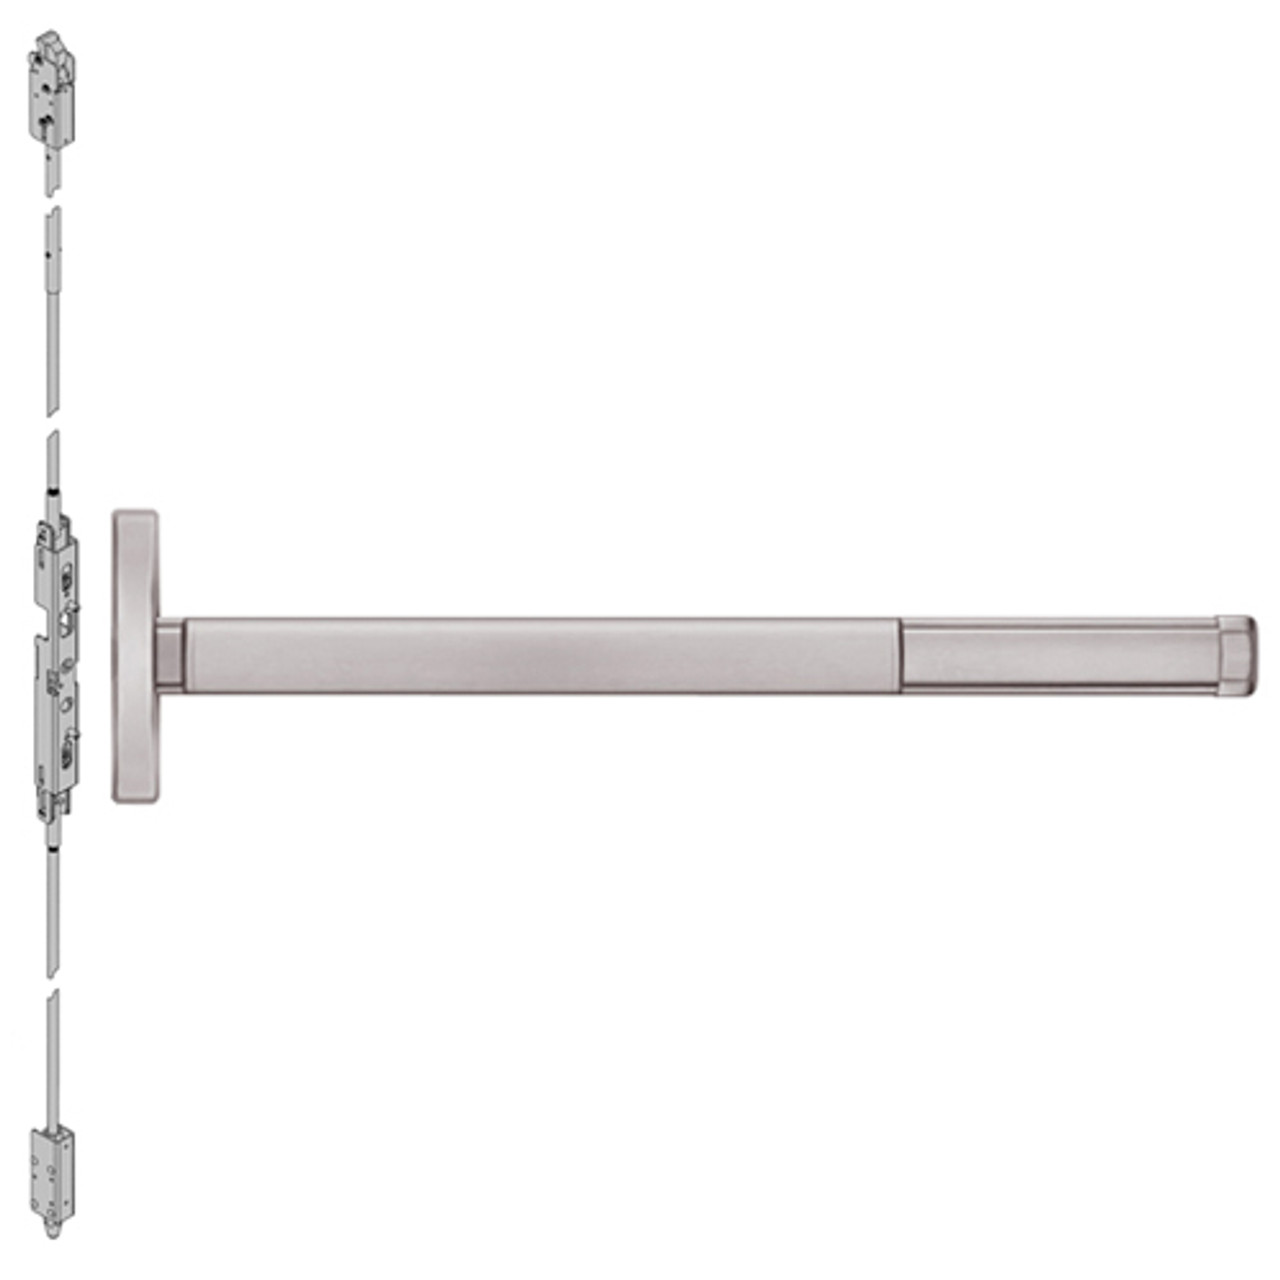 DEFL2603-628-48 PHI 2600 Series Fire Rated Concealed Vertical Rod Exit Device with Delayed Egress Prepped for Key Retracts Latchbolt in Satin Aluminum Finish